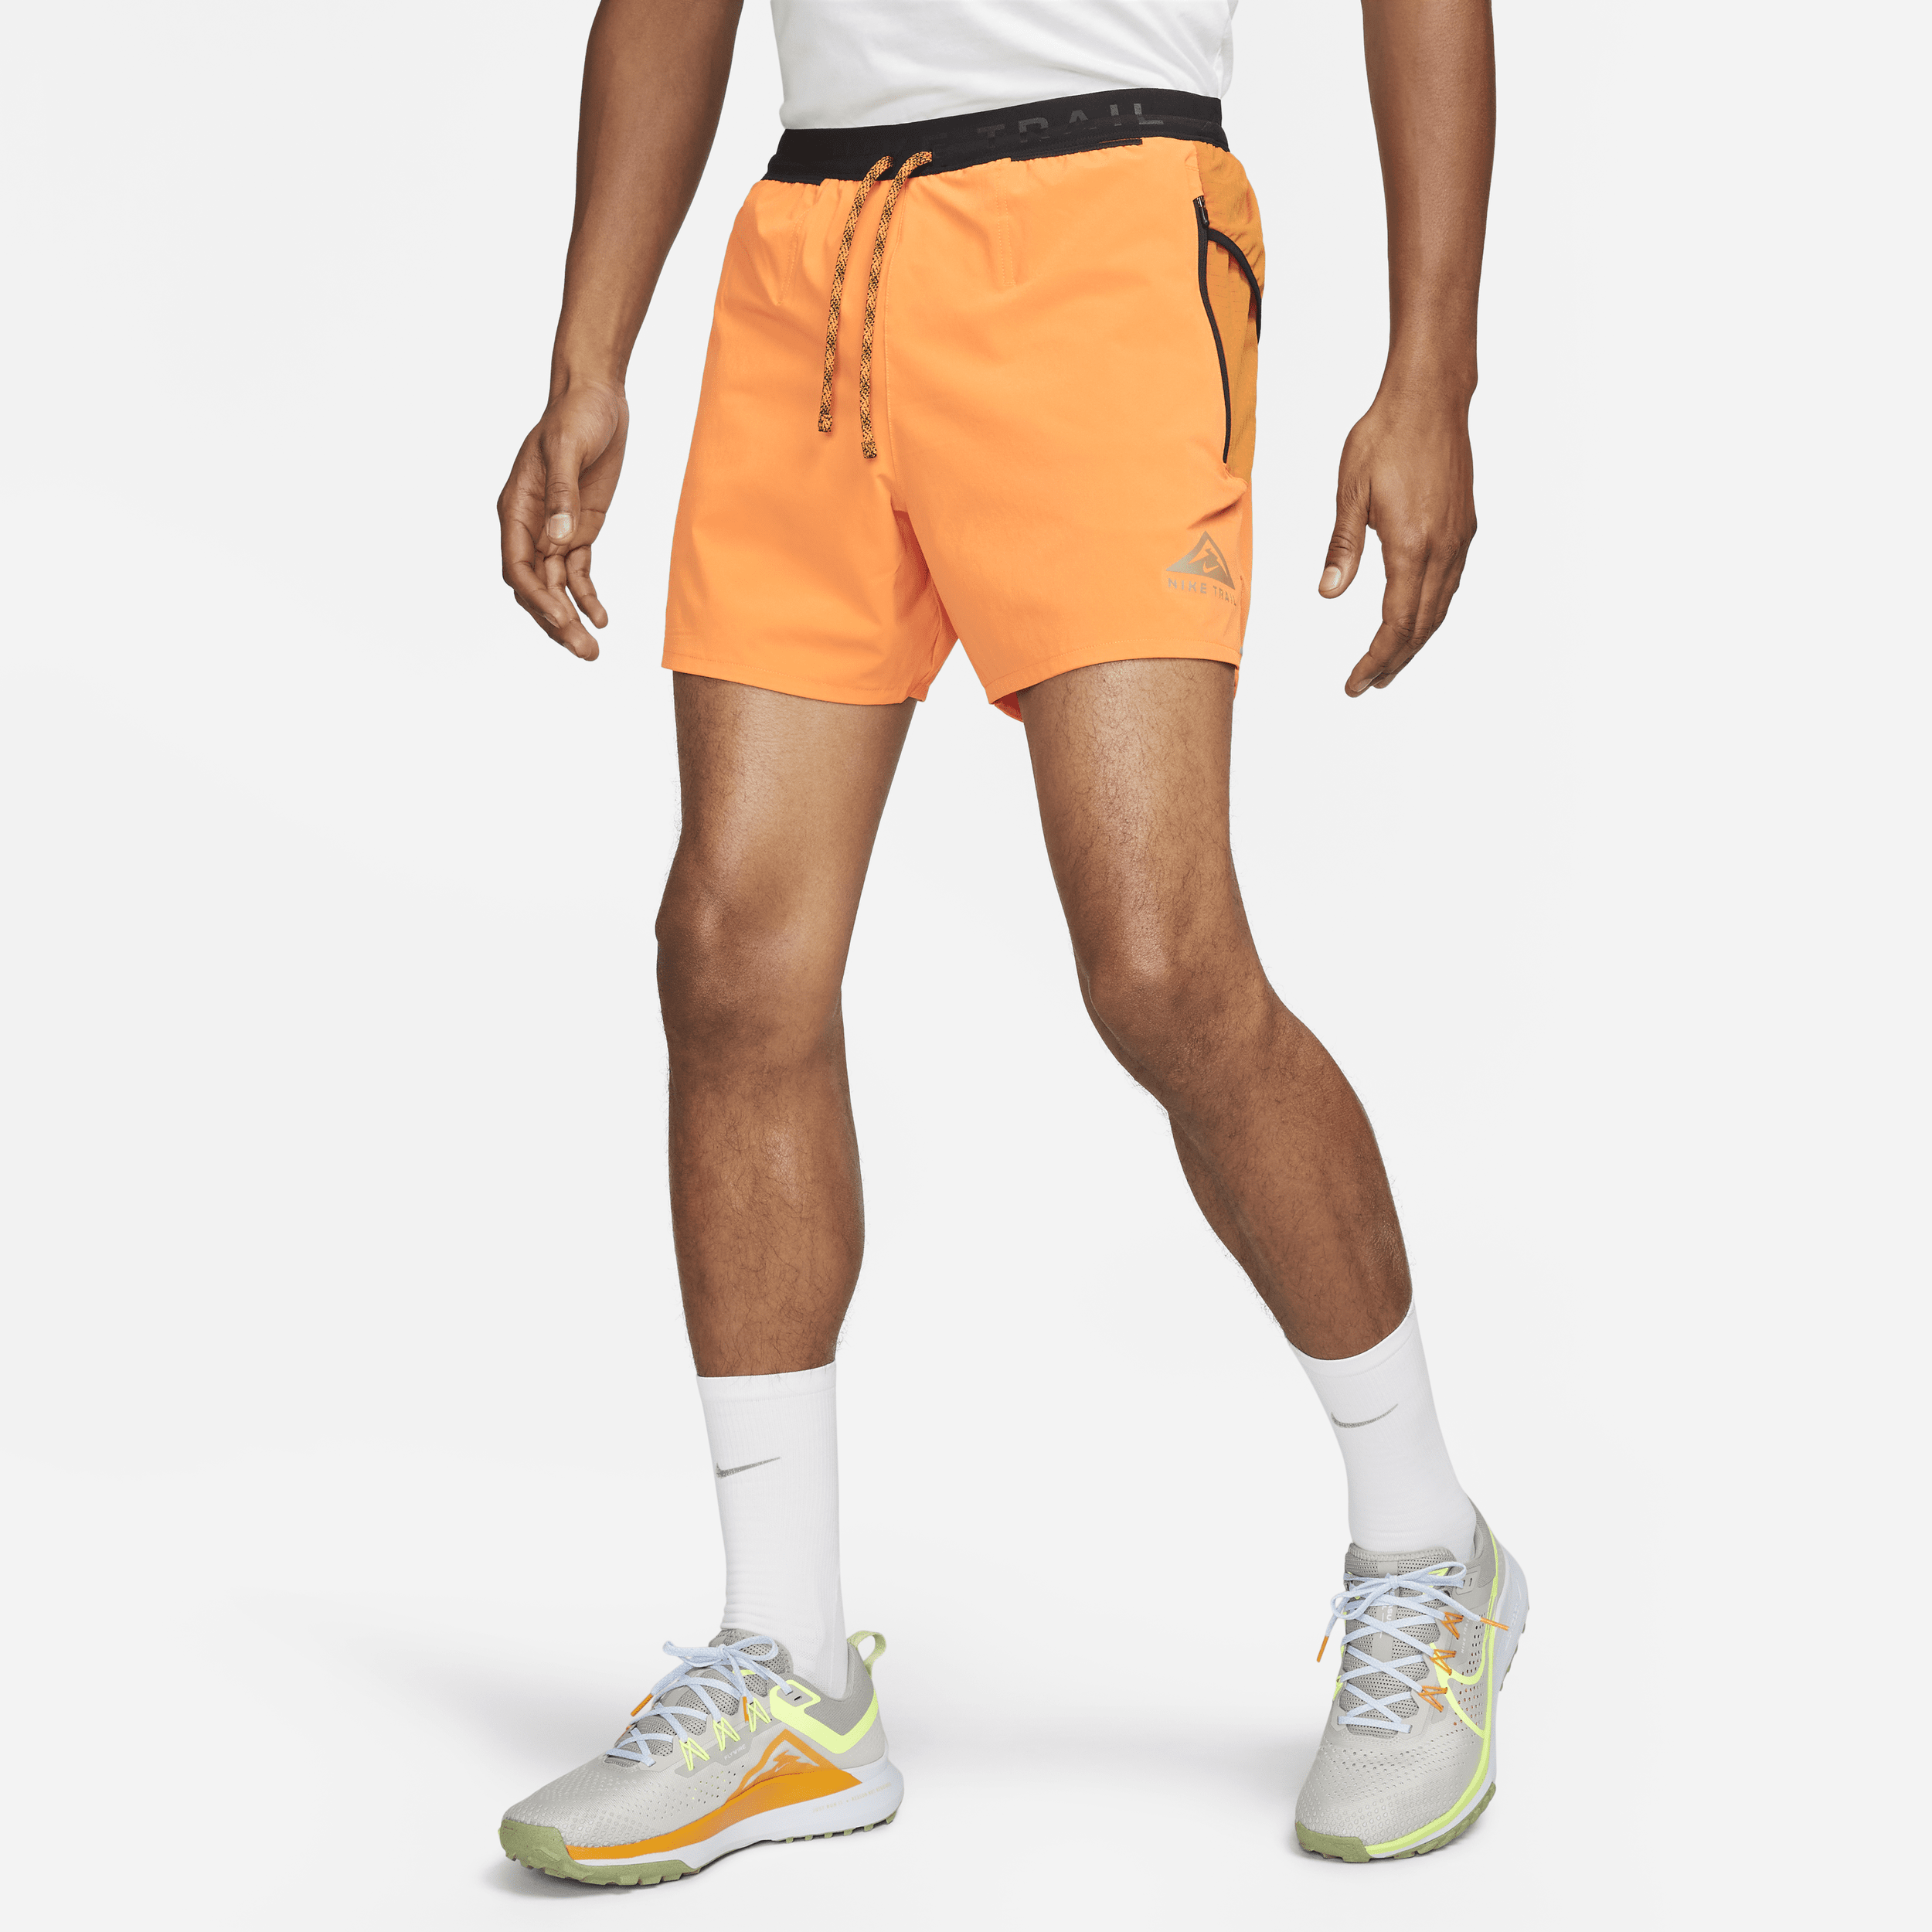 NIKE MEN'S TRAIL SECOND SUNRISE DRI-FIT 5" BRIEF-LINED RUNNING SHORTS,1009824239